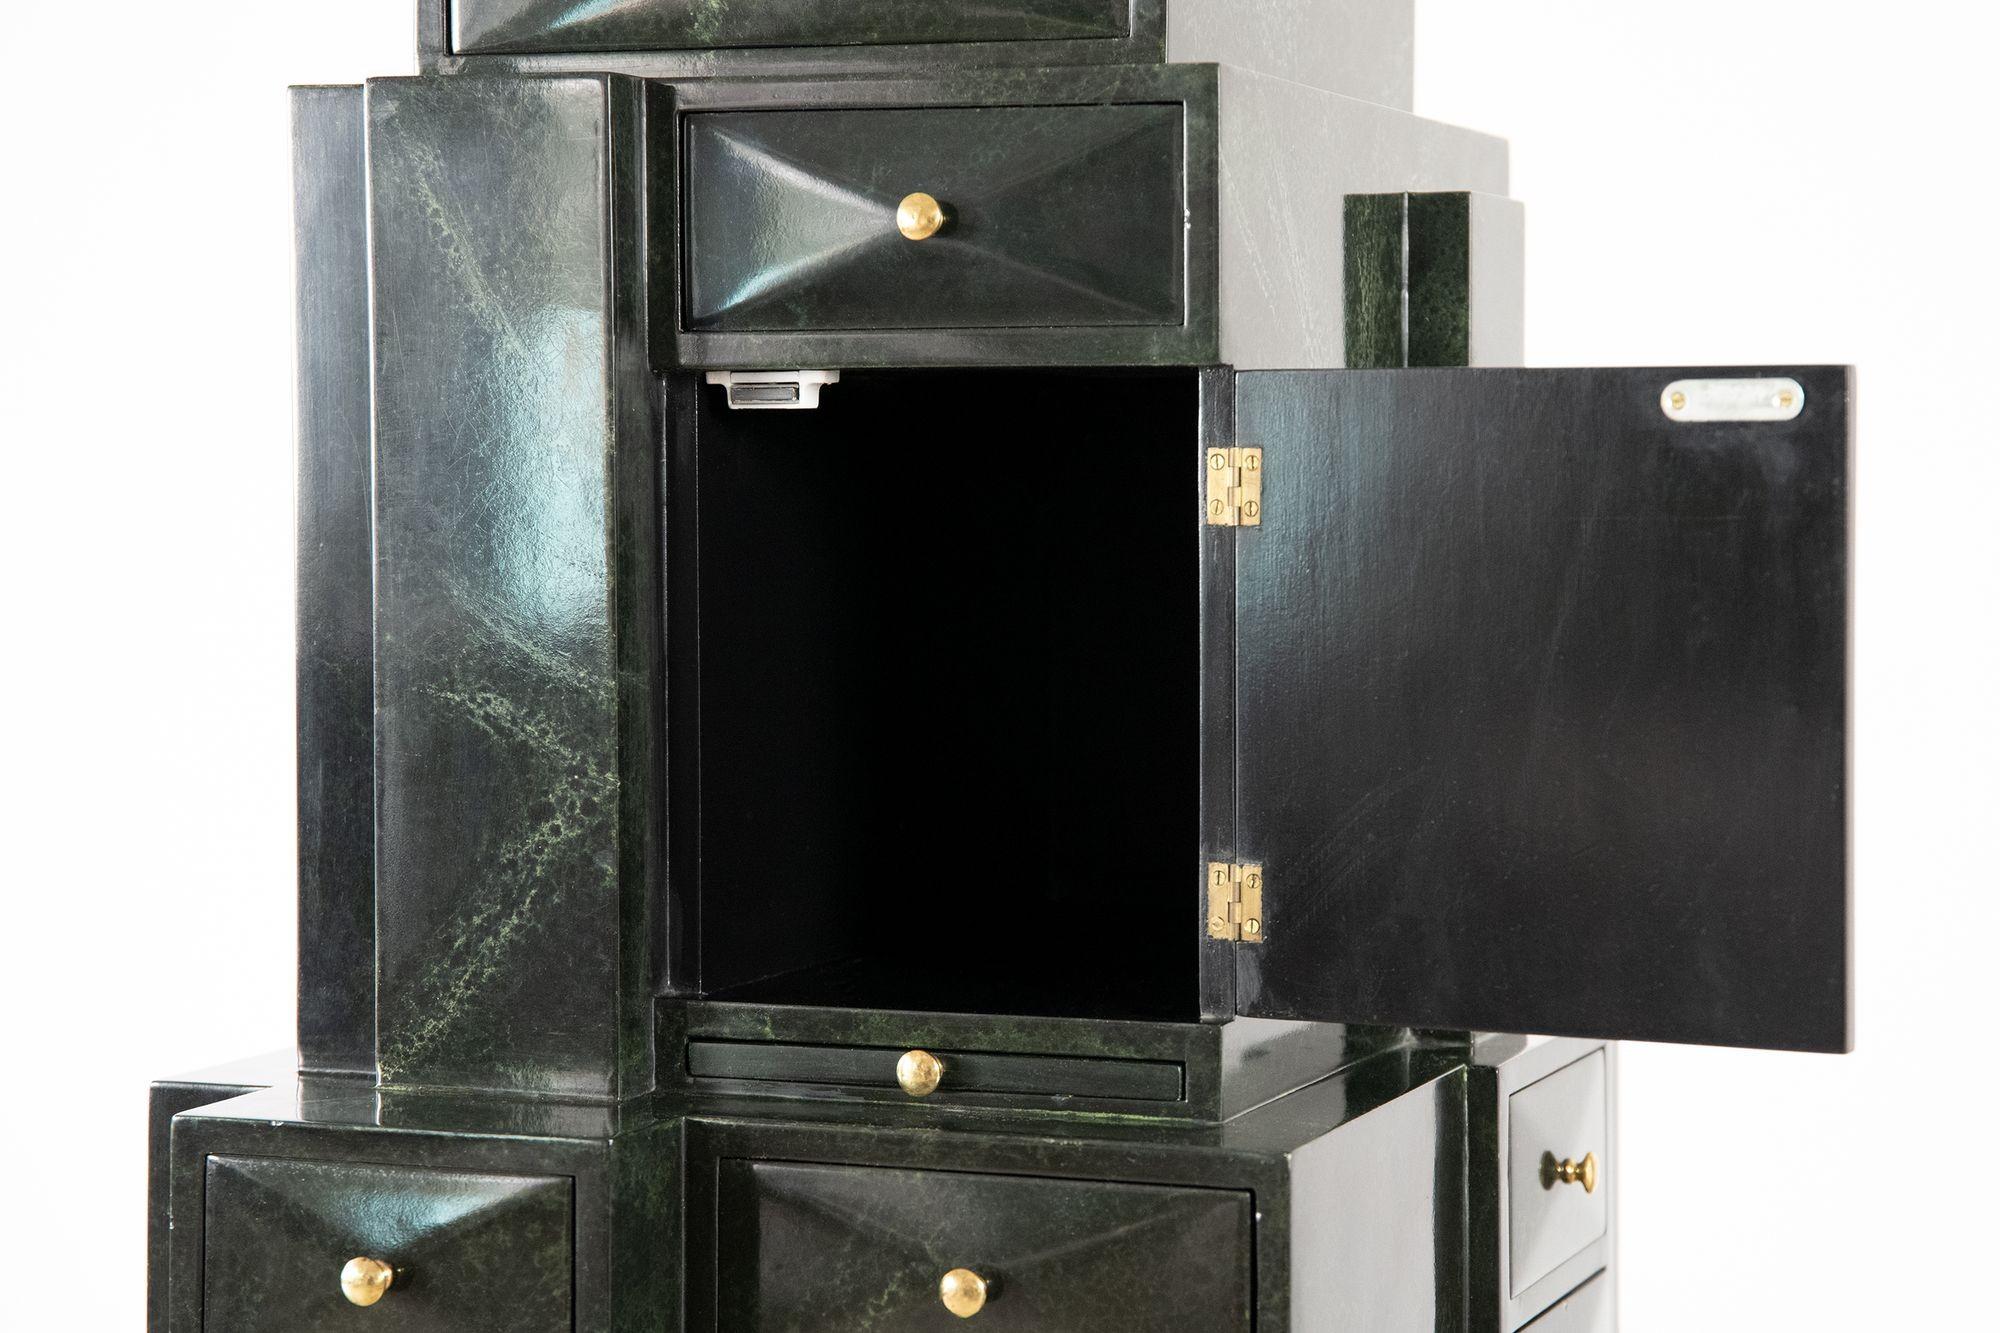 English Towering Skyscraper Storage Cabinet by Maitland Smith 1980s For Sale